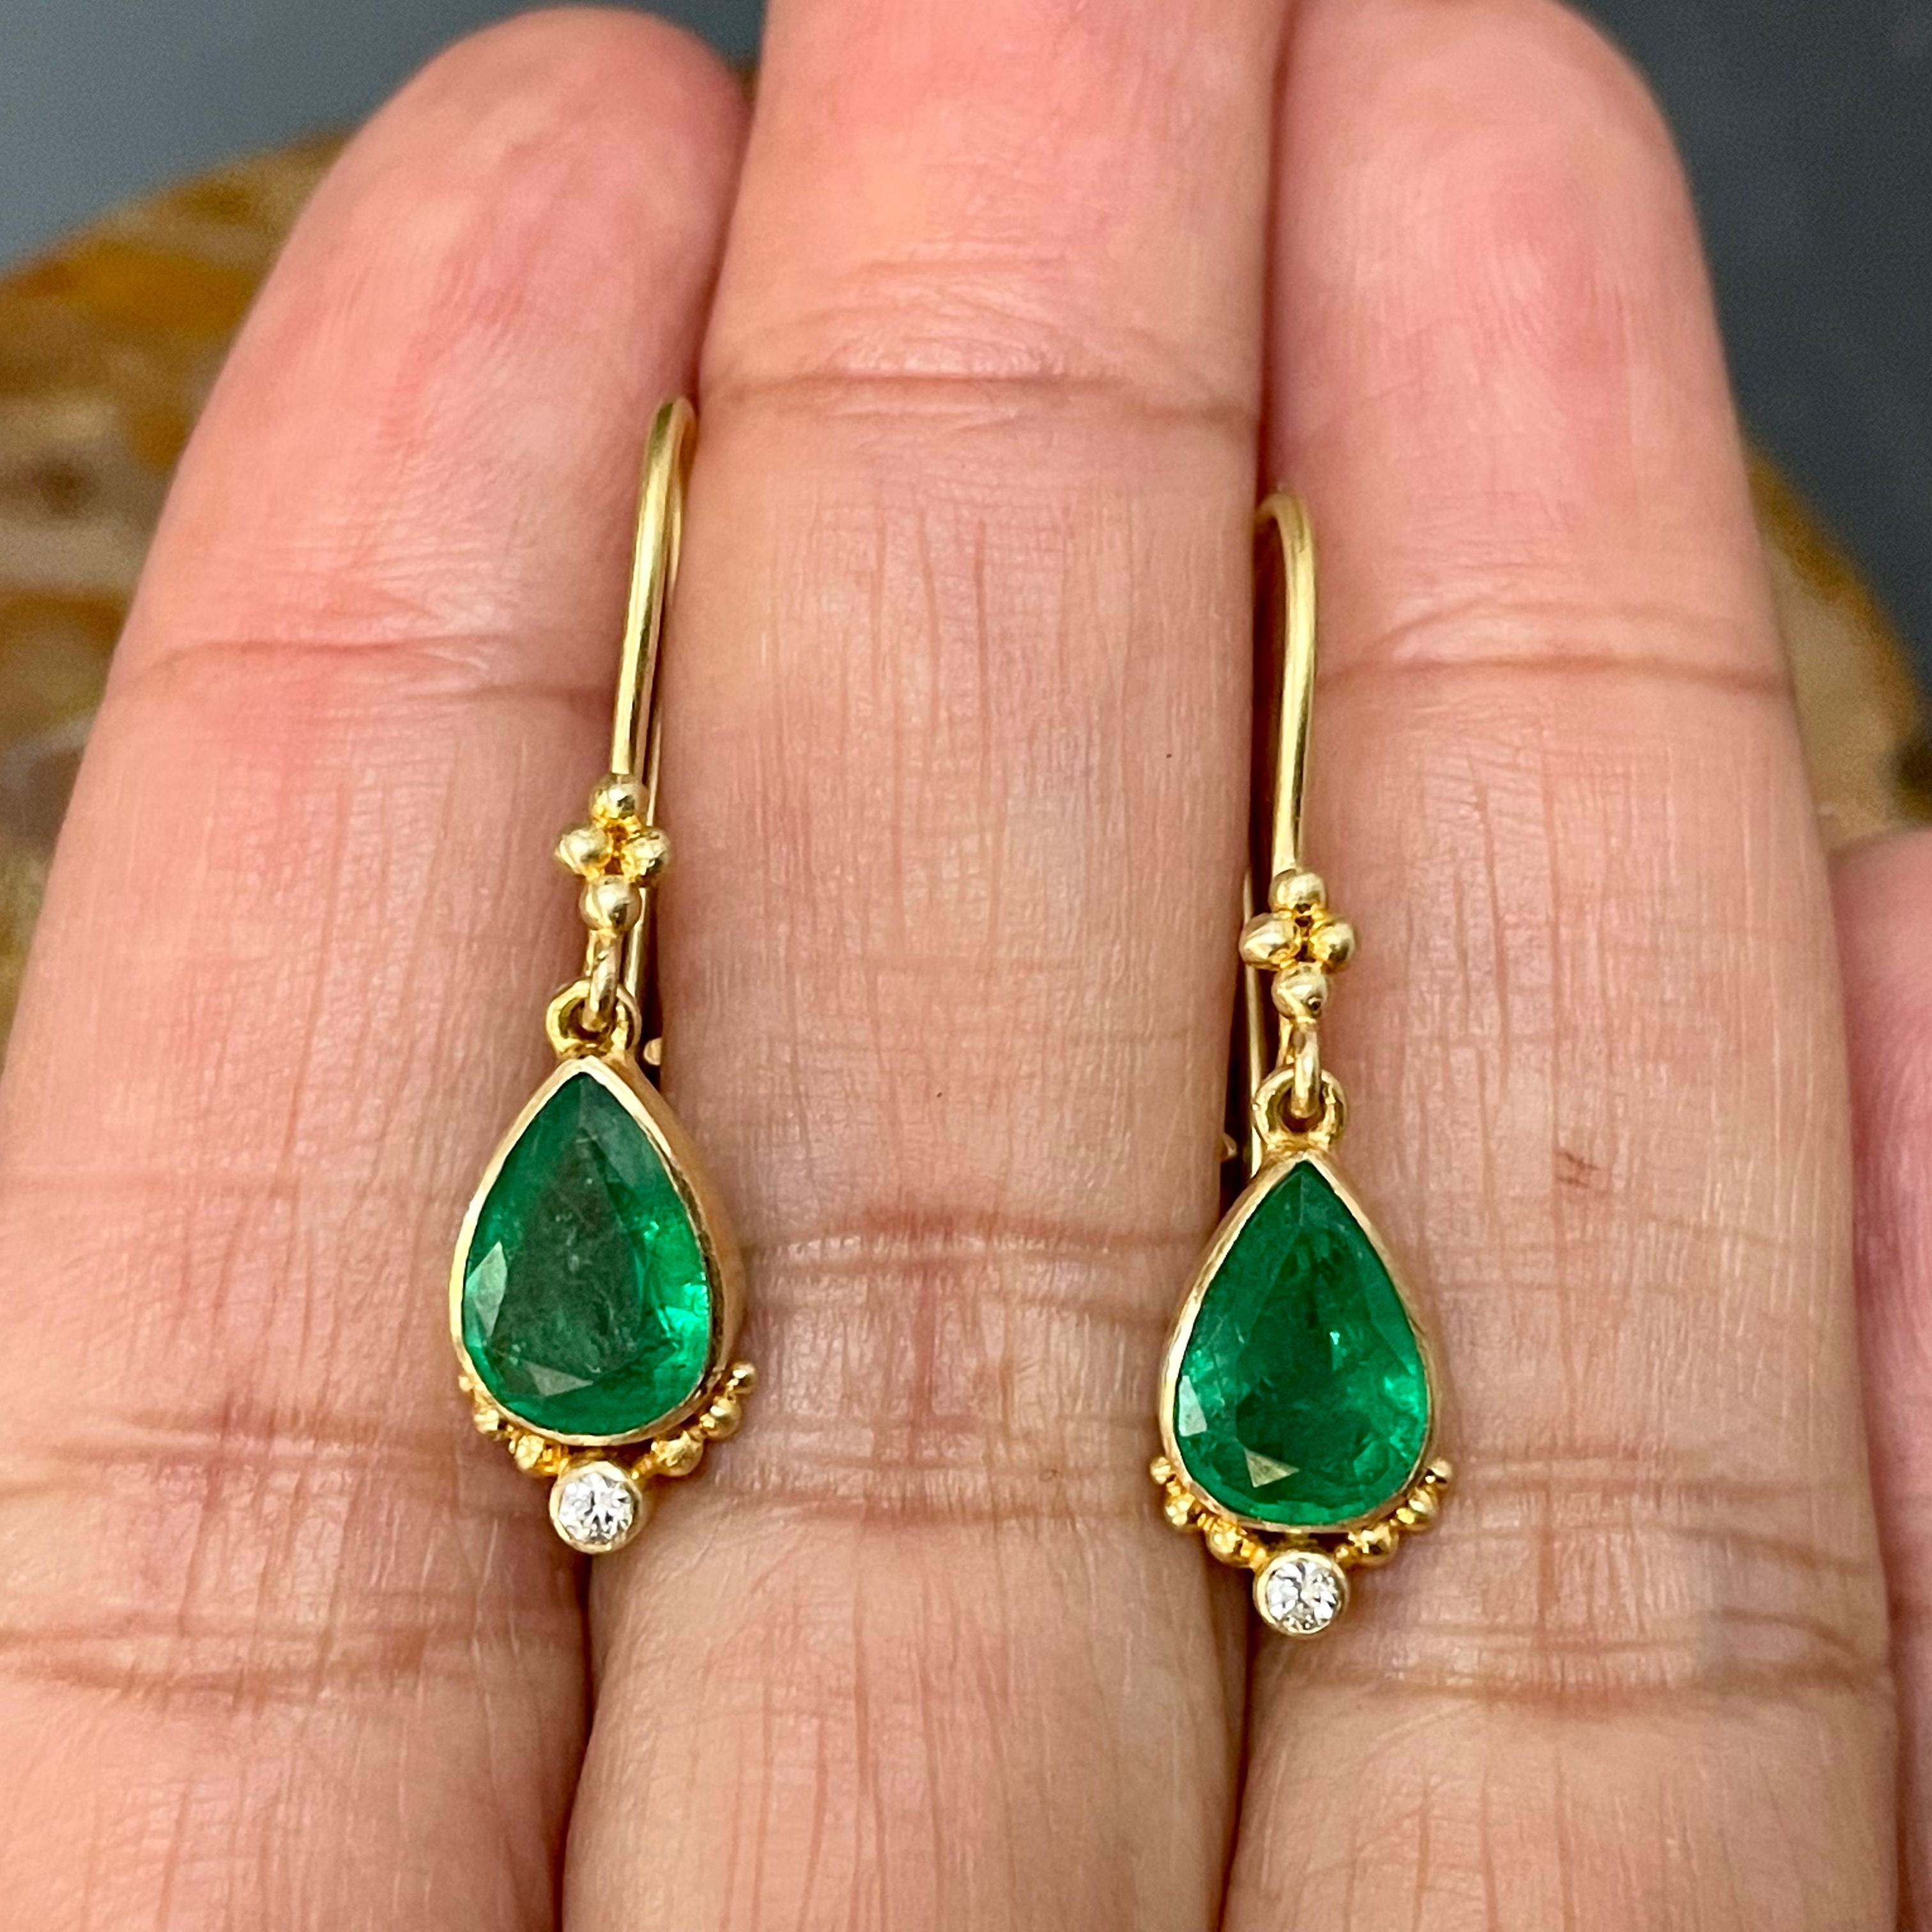 Two 6 x 9 mm pear shaped faceted emeralds are ornamented with sparkling 1.8 mm VS1 diamonds and graduated sized granulation below safety clasp wires in this ancient-inspired handmade design.  Delightful!